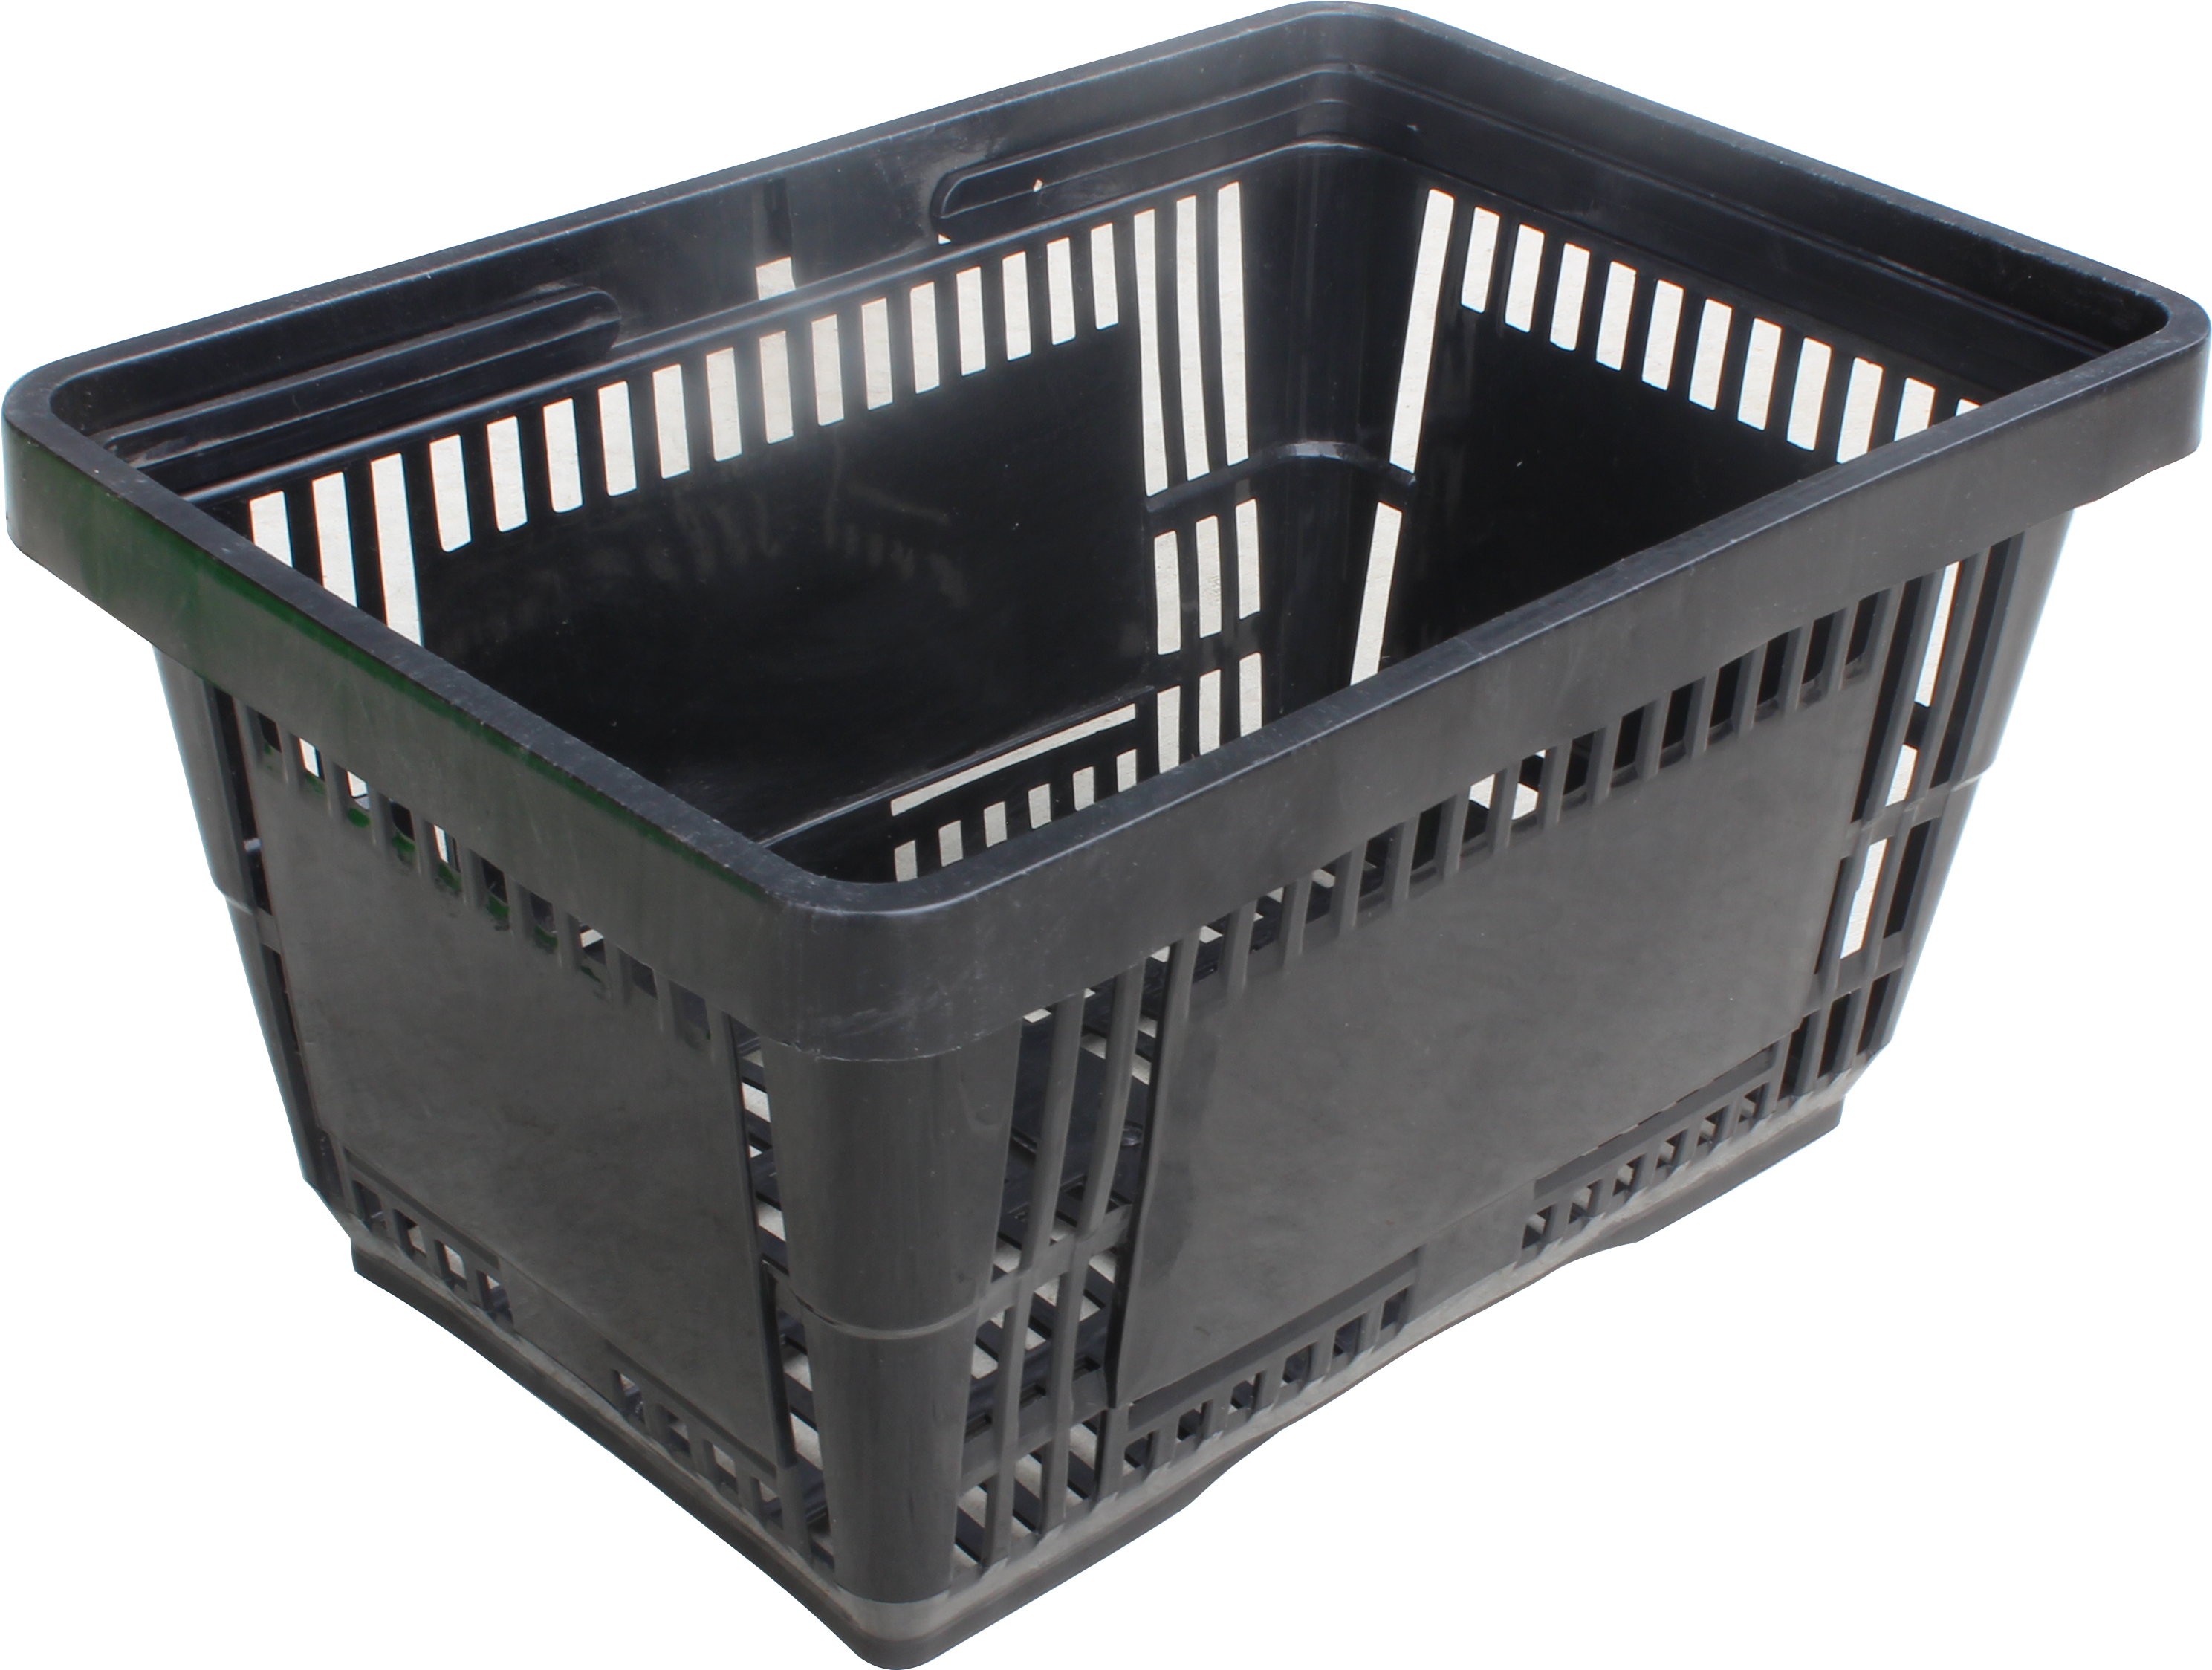 trb-cit-005, Shopping Basket (Plastic), Shopping Baskets from Astrolift